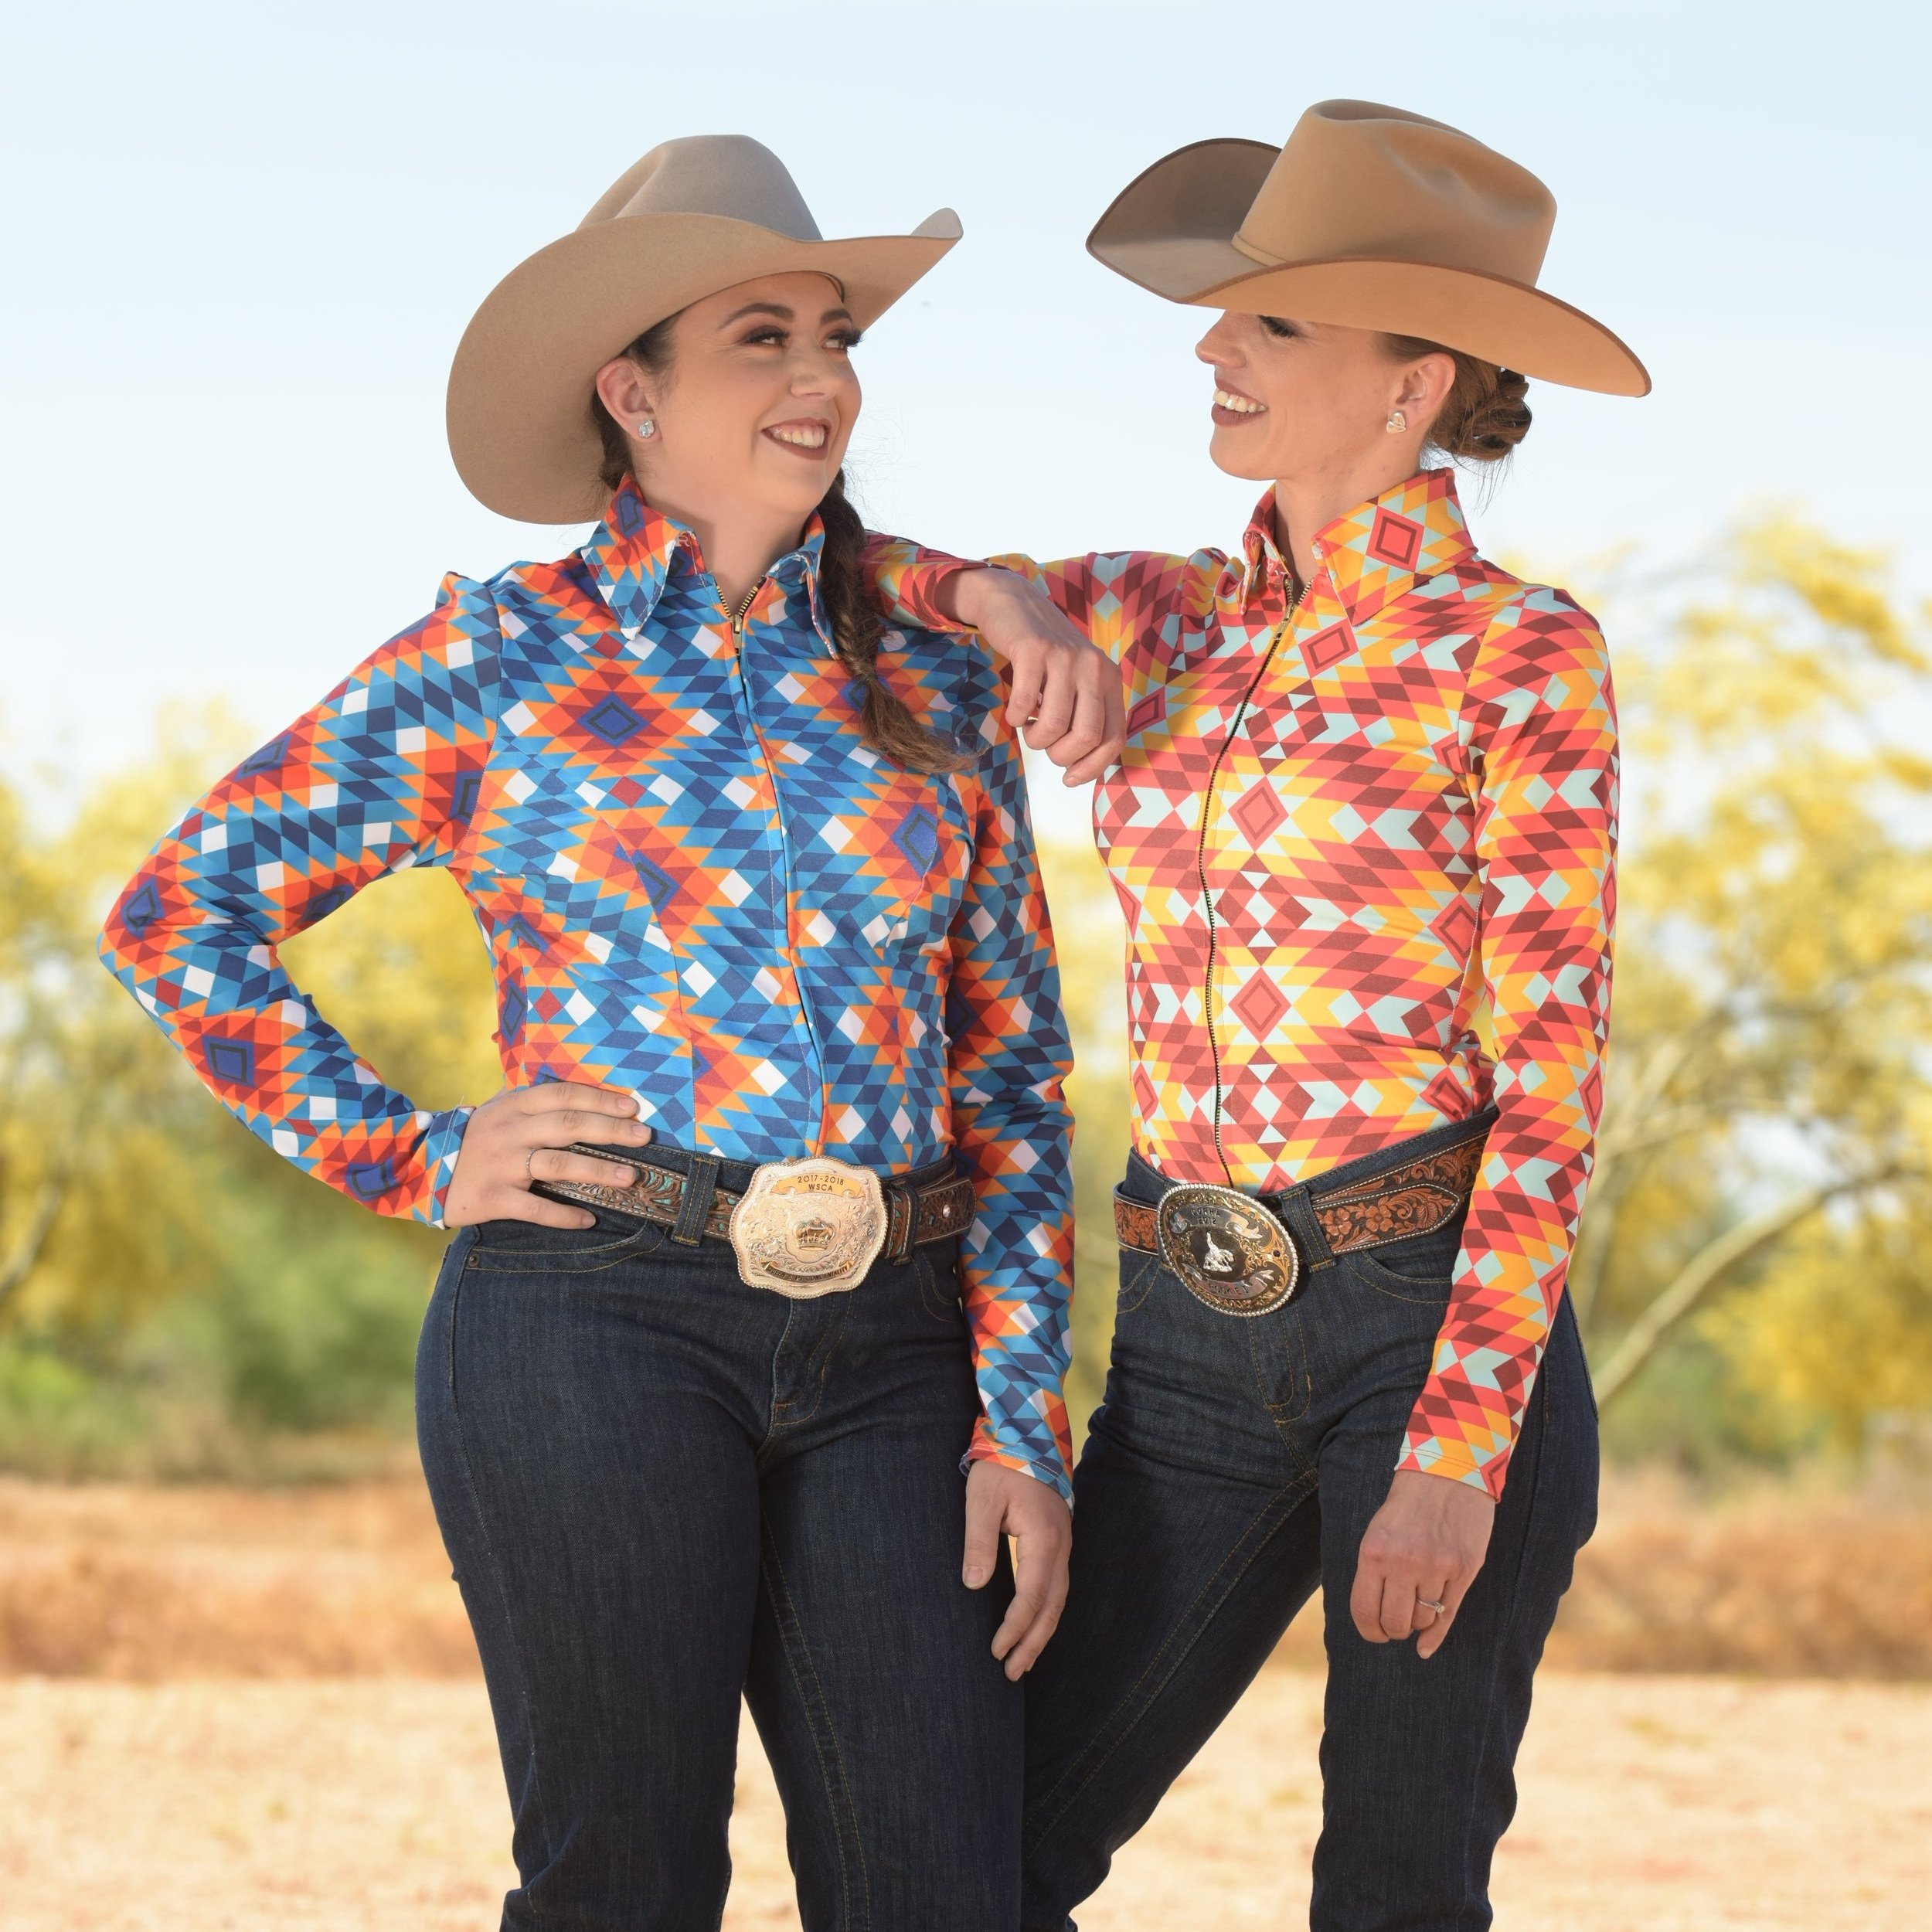 sparkle-ridge-womens-western-wear-with-bling-rodeo-shirts-horse-show-clothing.JPG (Copy) (Copy)